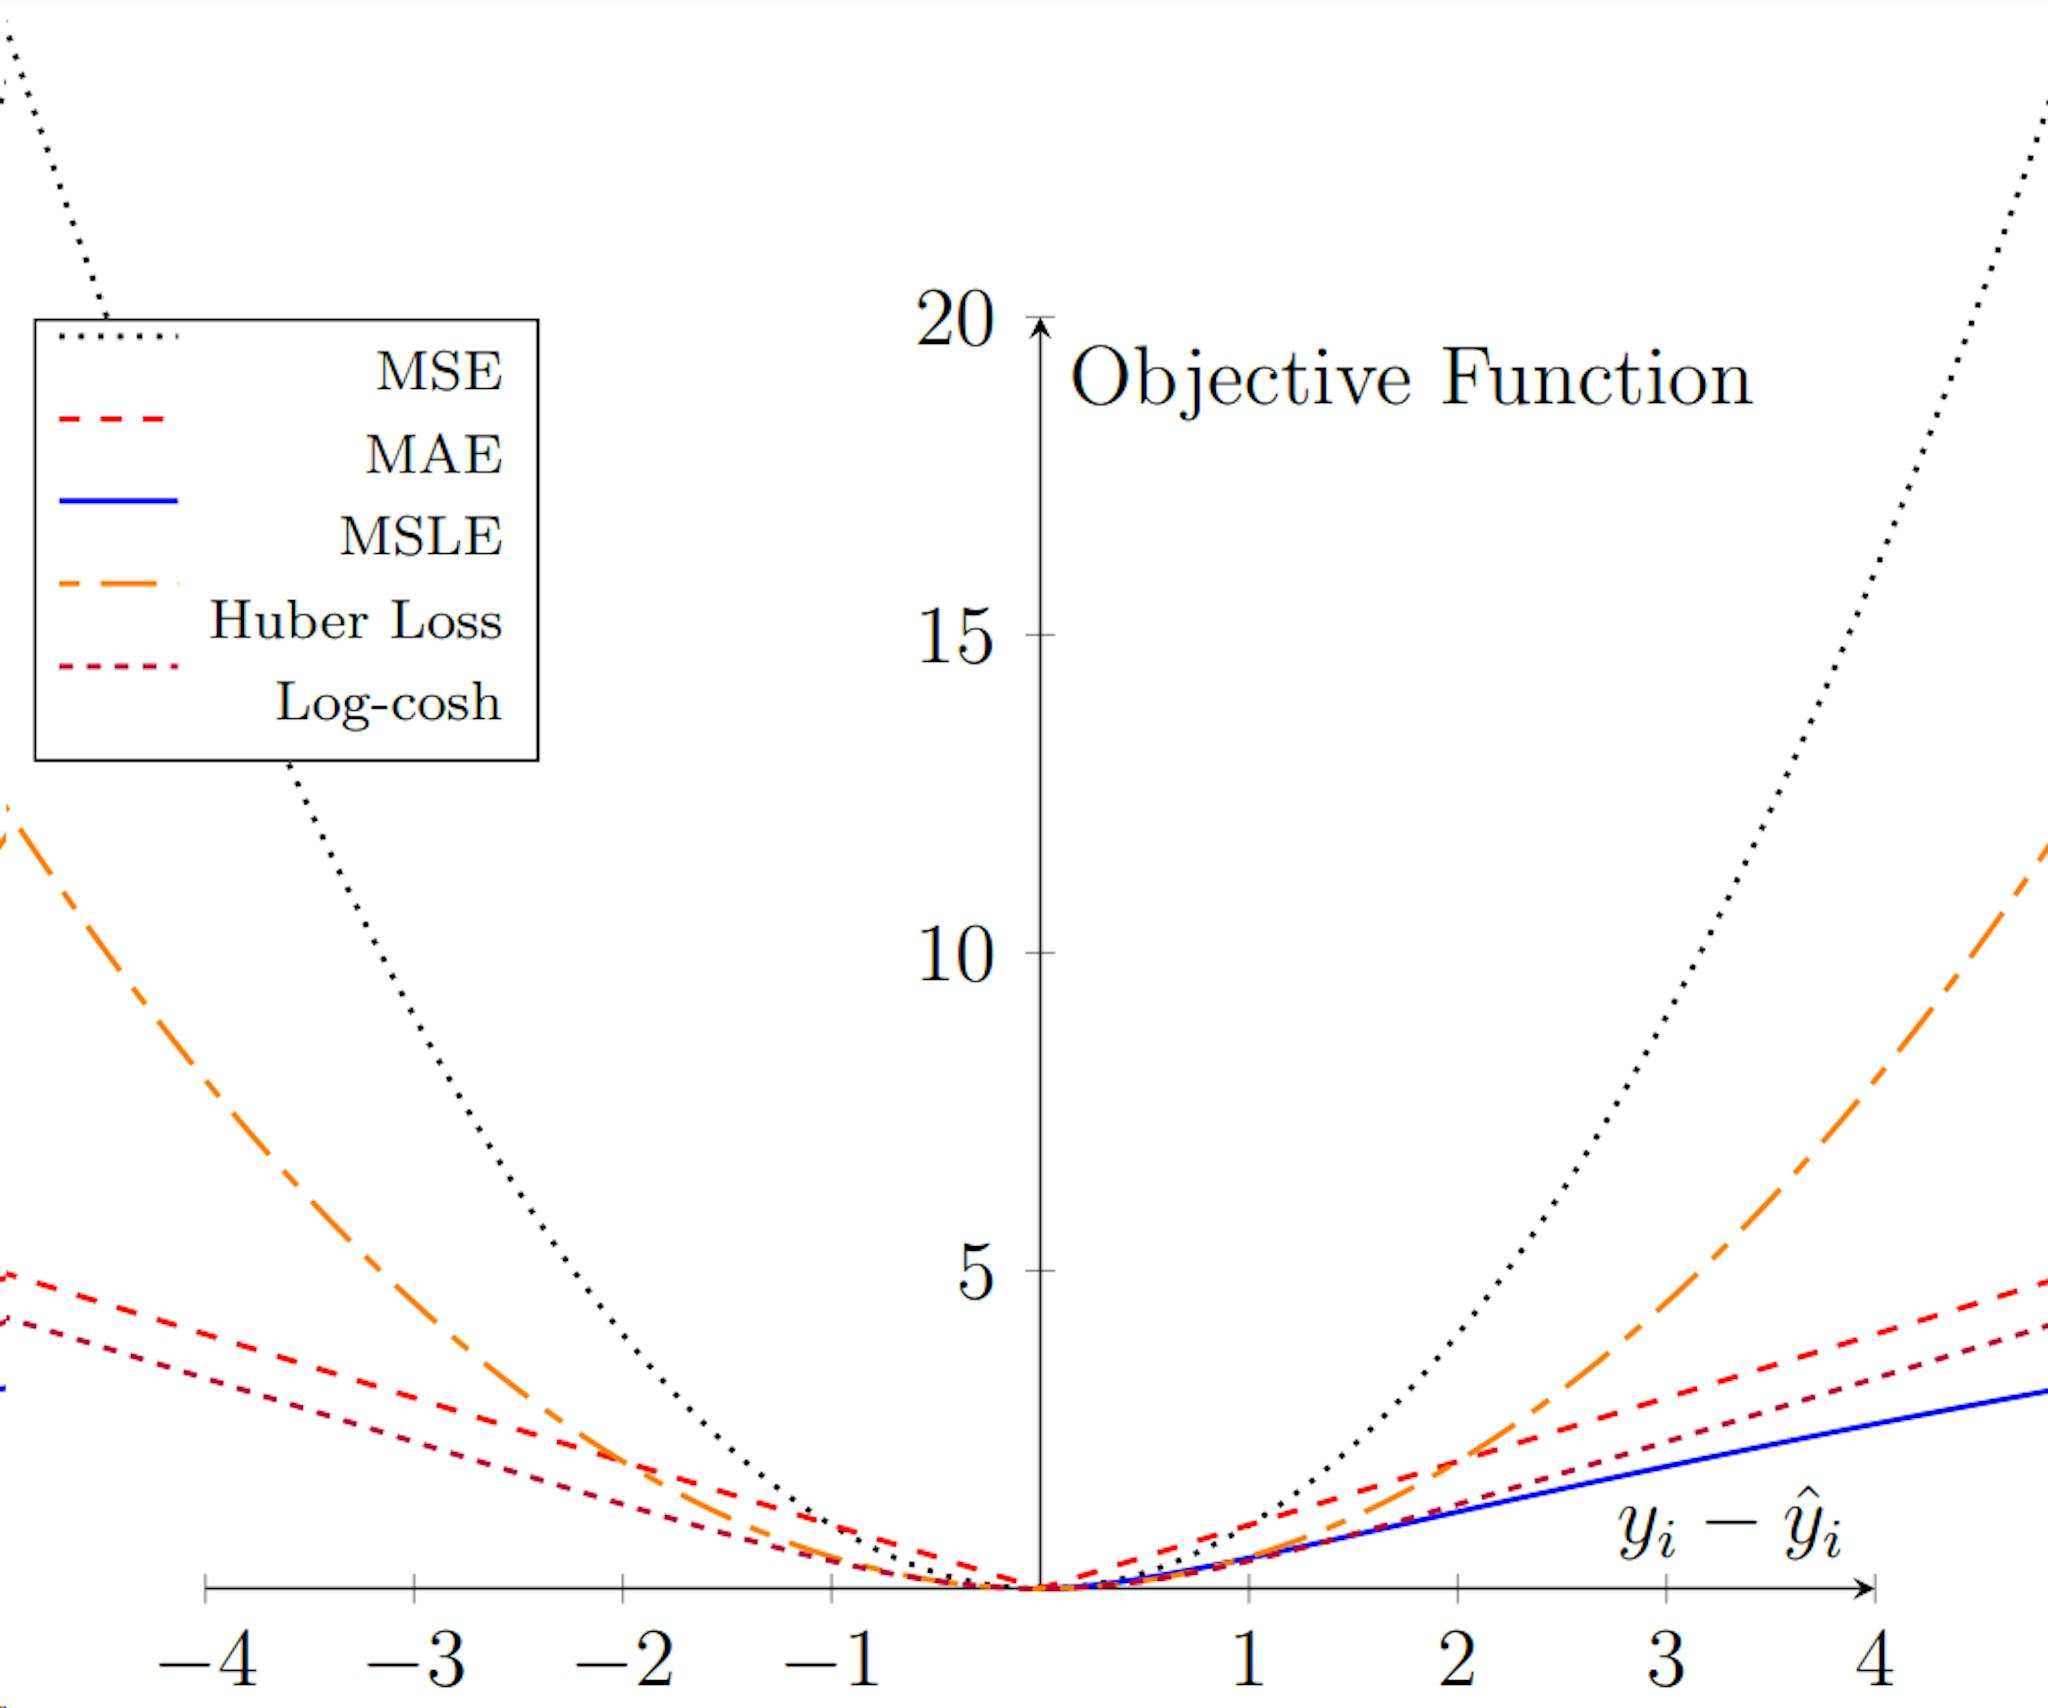 Objective Function and their relative magnitude against error between predicted and actual value